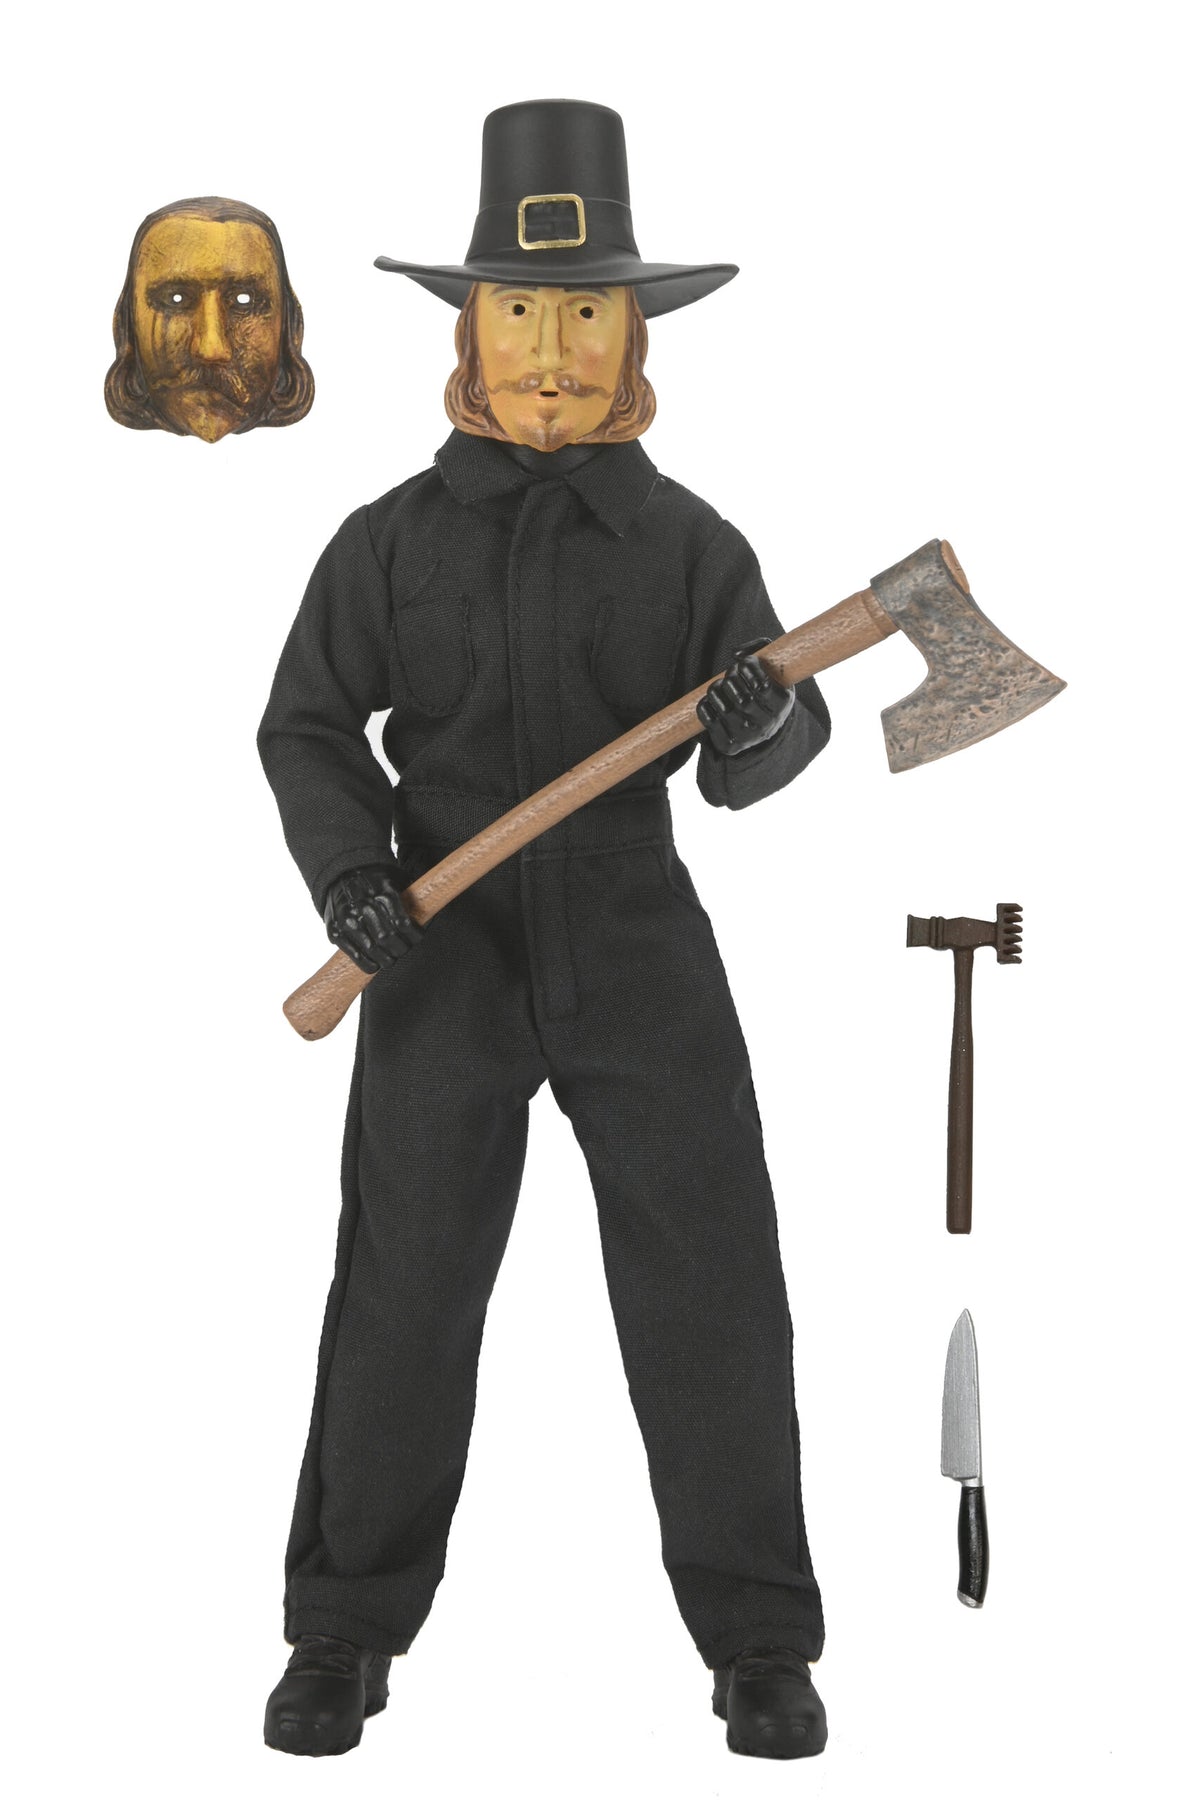 NECA - Thanksgiving - John Carver 8” Clothed Action Figure